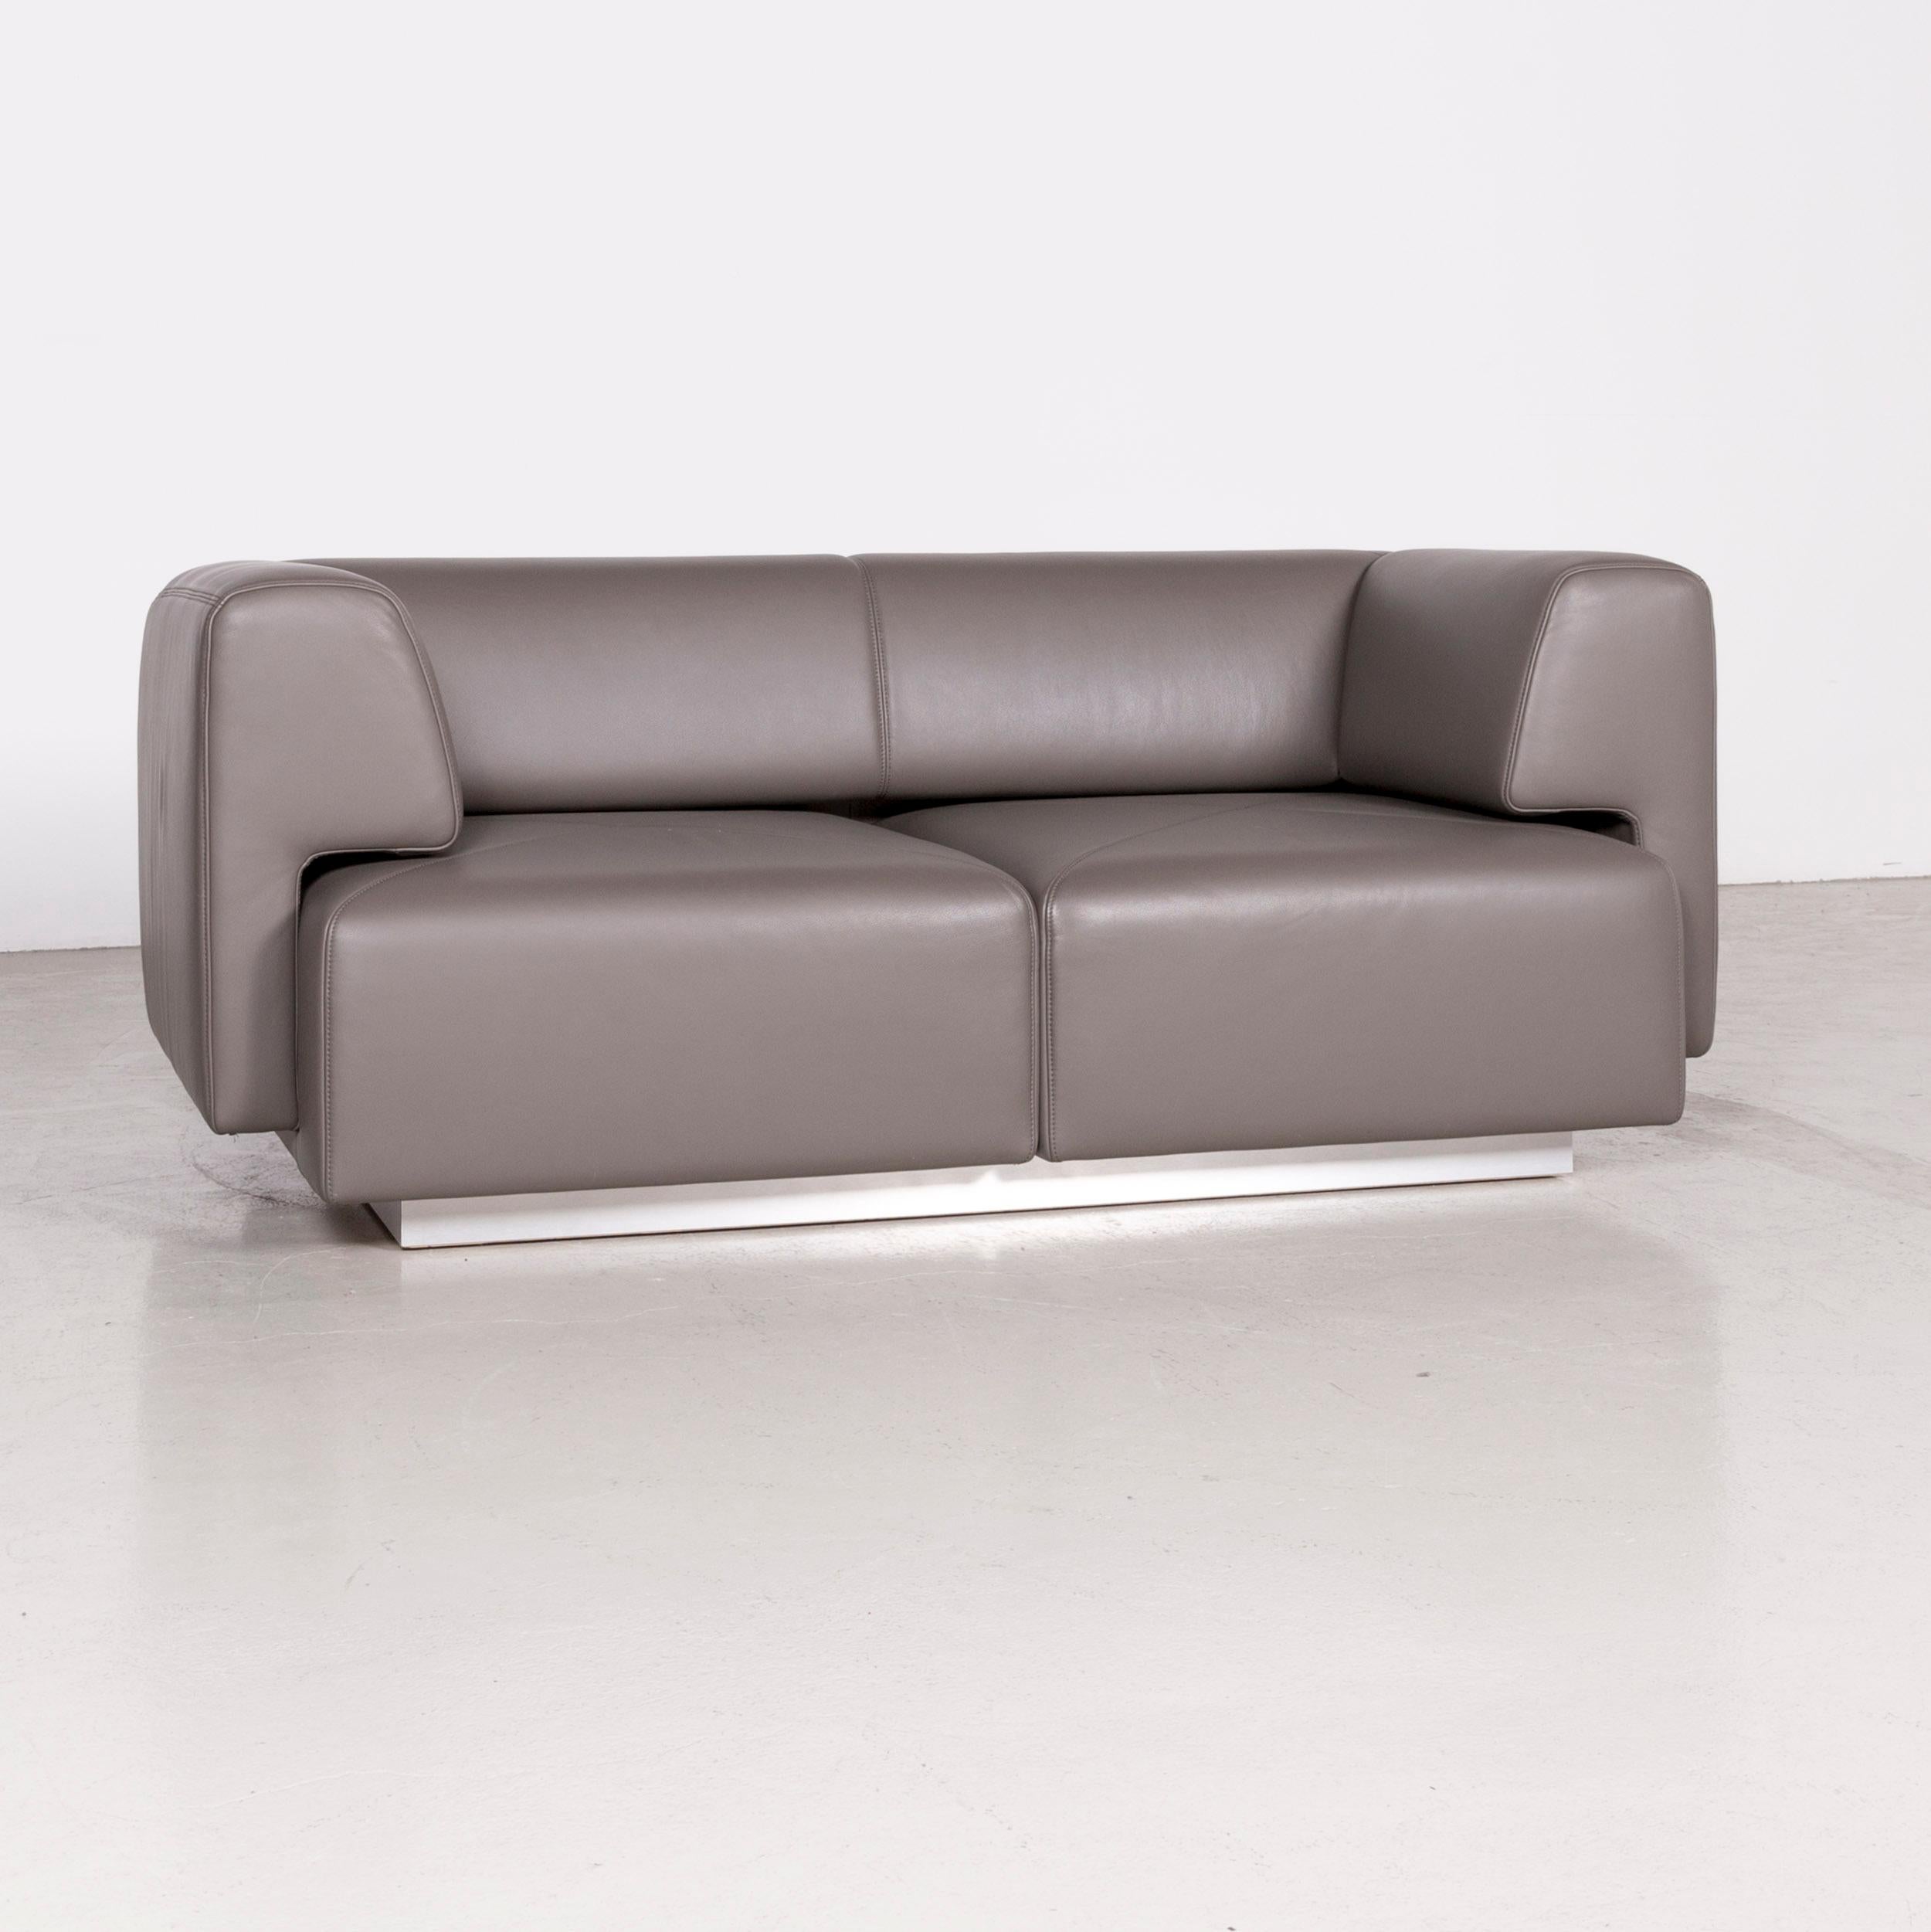 De Sede designer leather sofa grey two-seat couch.